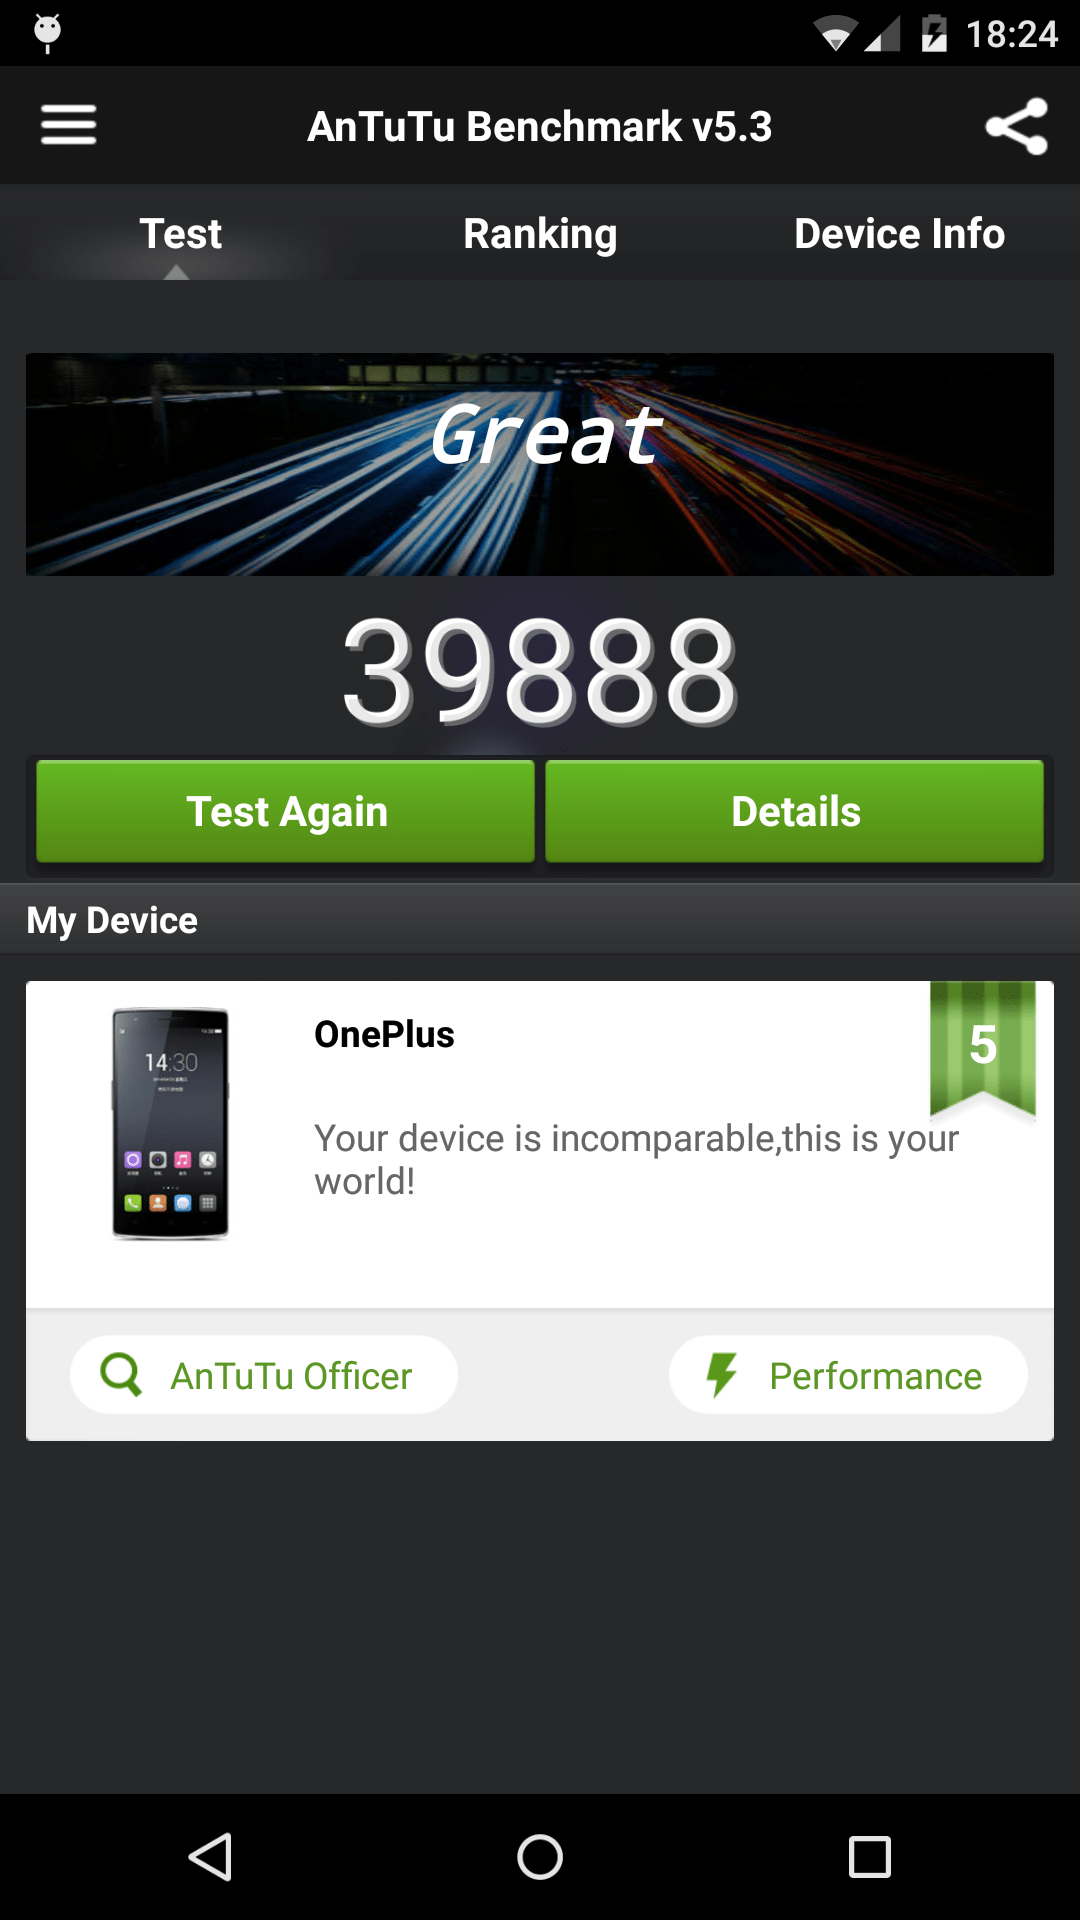 Screenshot of the AnTuTu result screen, showing "your device is incomparable" as result